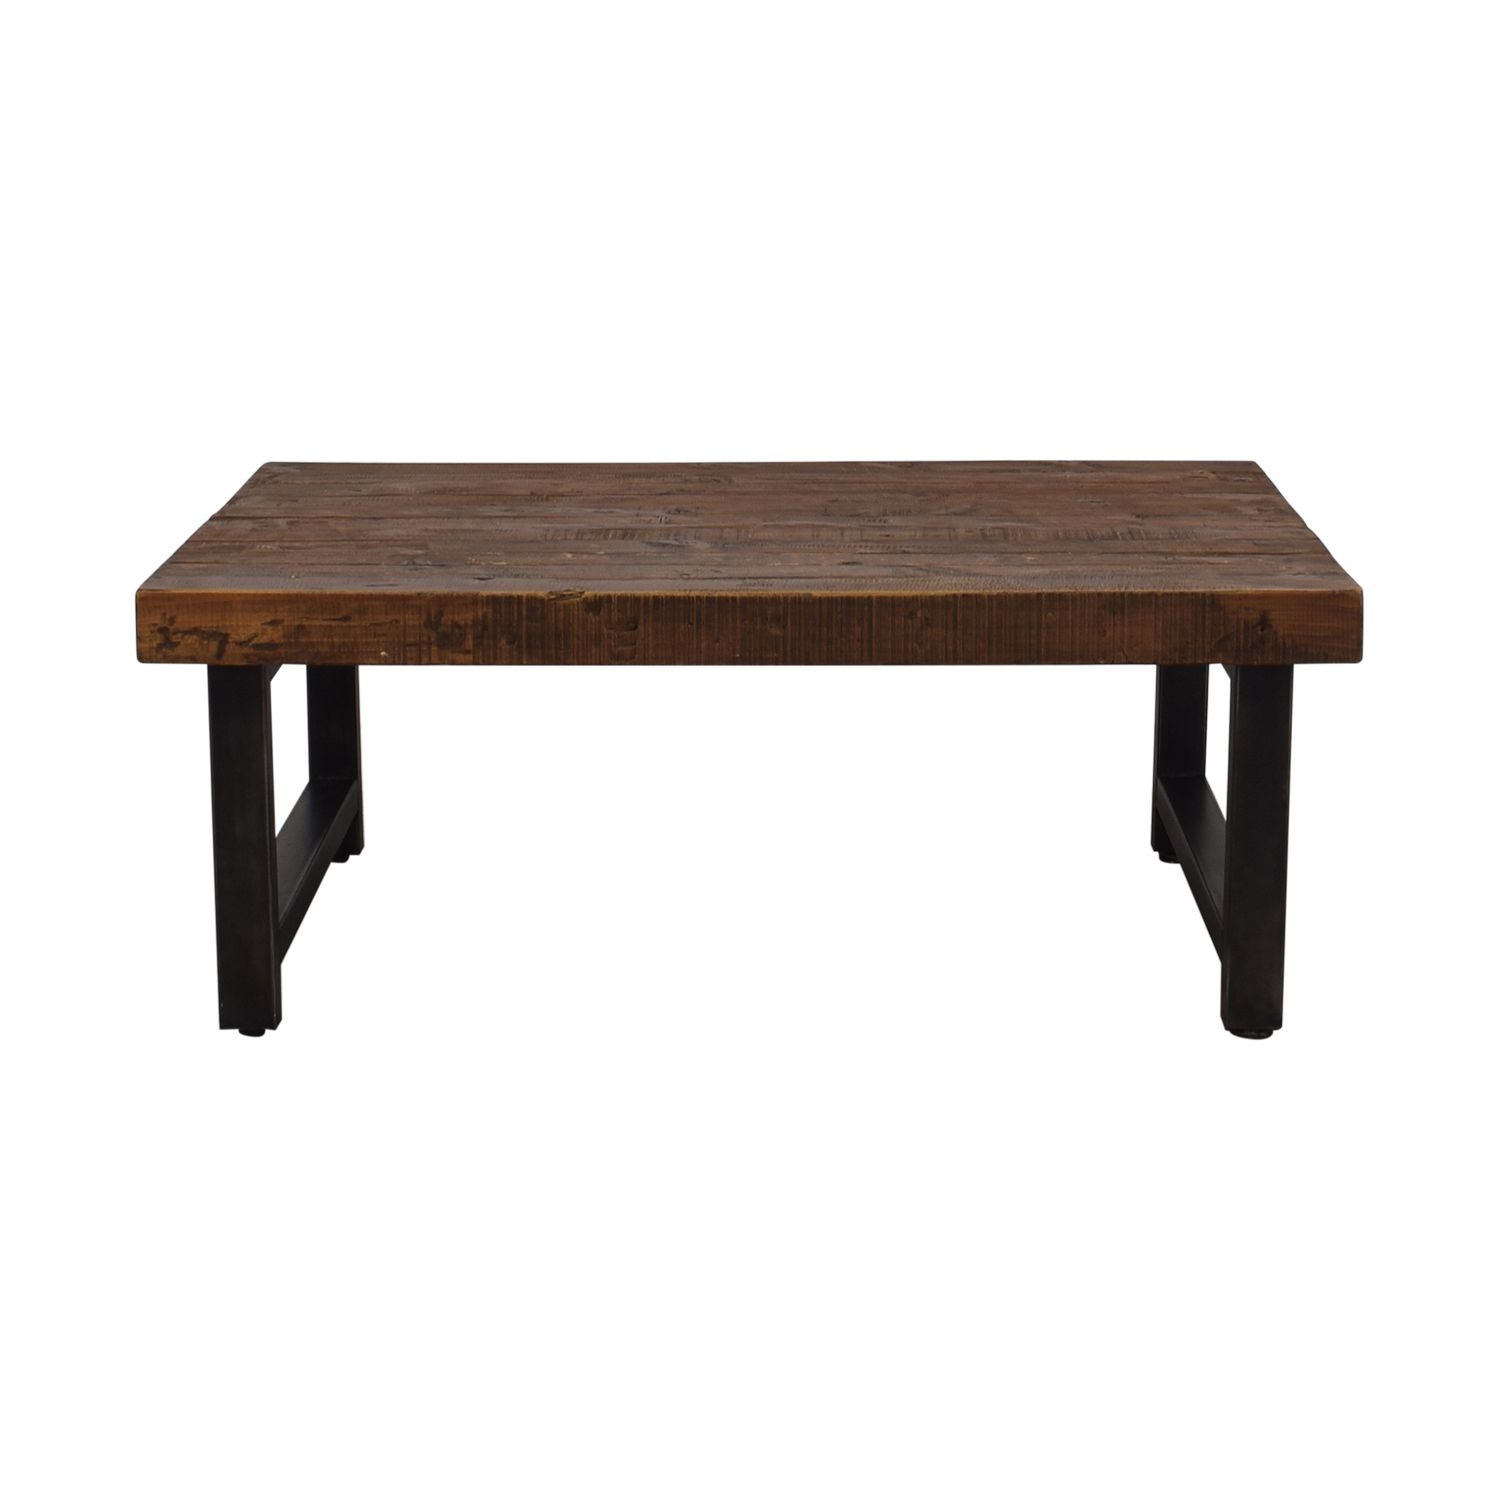 [%69% Off – Pottery Barn Pottery Barn Griffin Reclaimed Wood Coffee Table /  Tables Regarding Best And Newest Griffin Reclaimed Wood Dining Tables|Griffin Reclaimed Wood Dining Tables With Regard To Best And Newest 69% Off – Pottery Barn Pottery Barn Griffin Reclaimed Wood Coffee Table /  Tables|Well Known Griffin Reclaimed Wood Dining Tables Inside 69% Off – Pottery Barn Pottery Barn Griffin Reclaimed Wood Coffee Table /  Tables|Famous 69% Off – Pottery Barn Pottery Barn Griffin Reclaimed Wood Coffee Table /  Tables Intended For Griffin Reclaimed Wood Dining Tables%] (View 8 of 25)